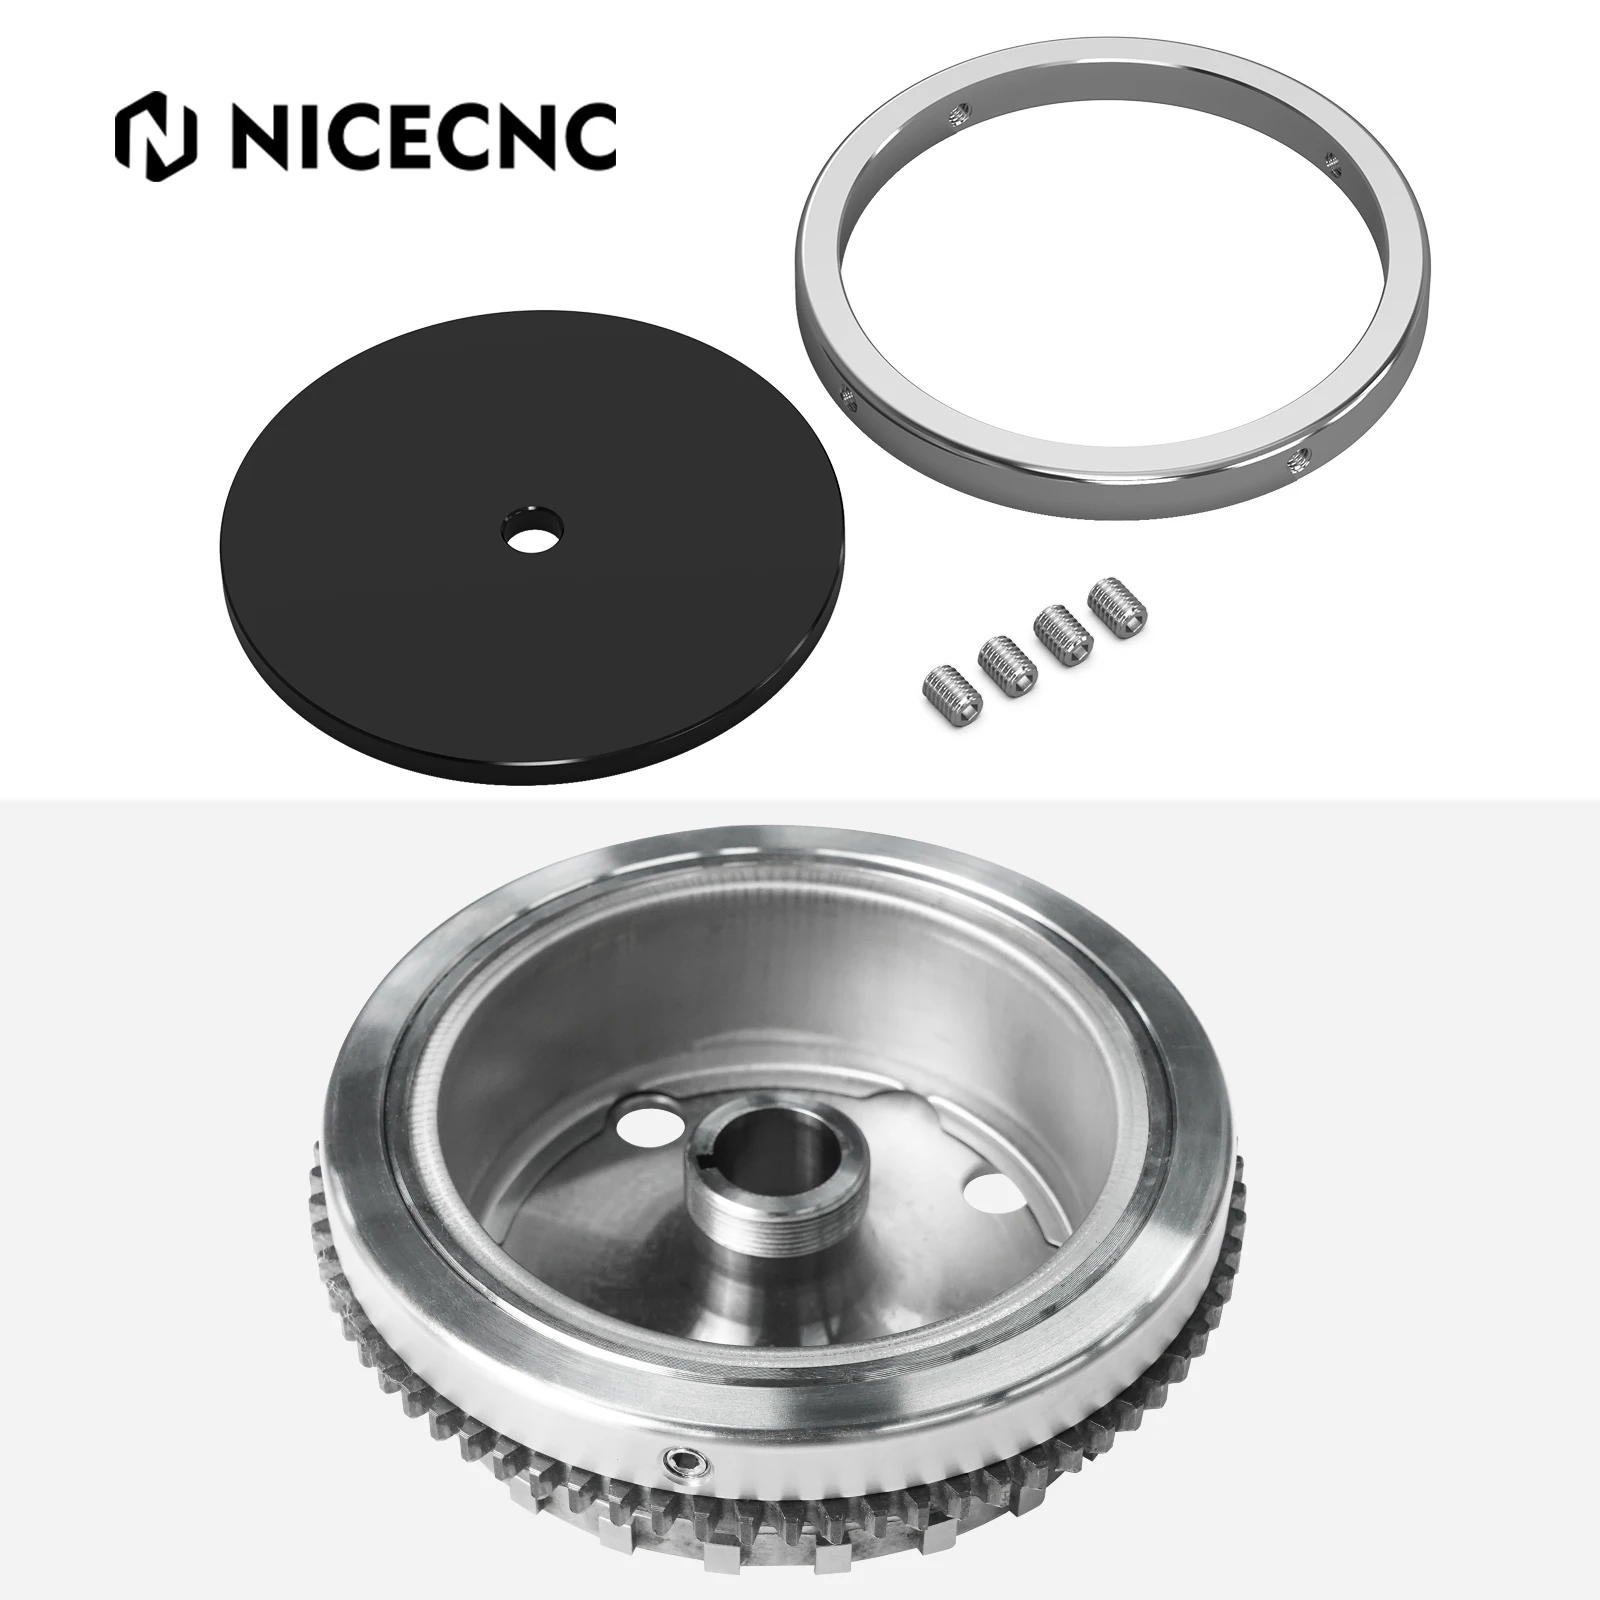 

NICECNC For 2023 KTM 250 300 EXC XCW tpi 10oz/283(±5g) Flywheel Weight Circle For KTM 250 300 EXC XC XCW 6D tpi 2017-2022 2021